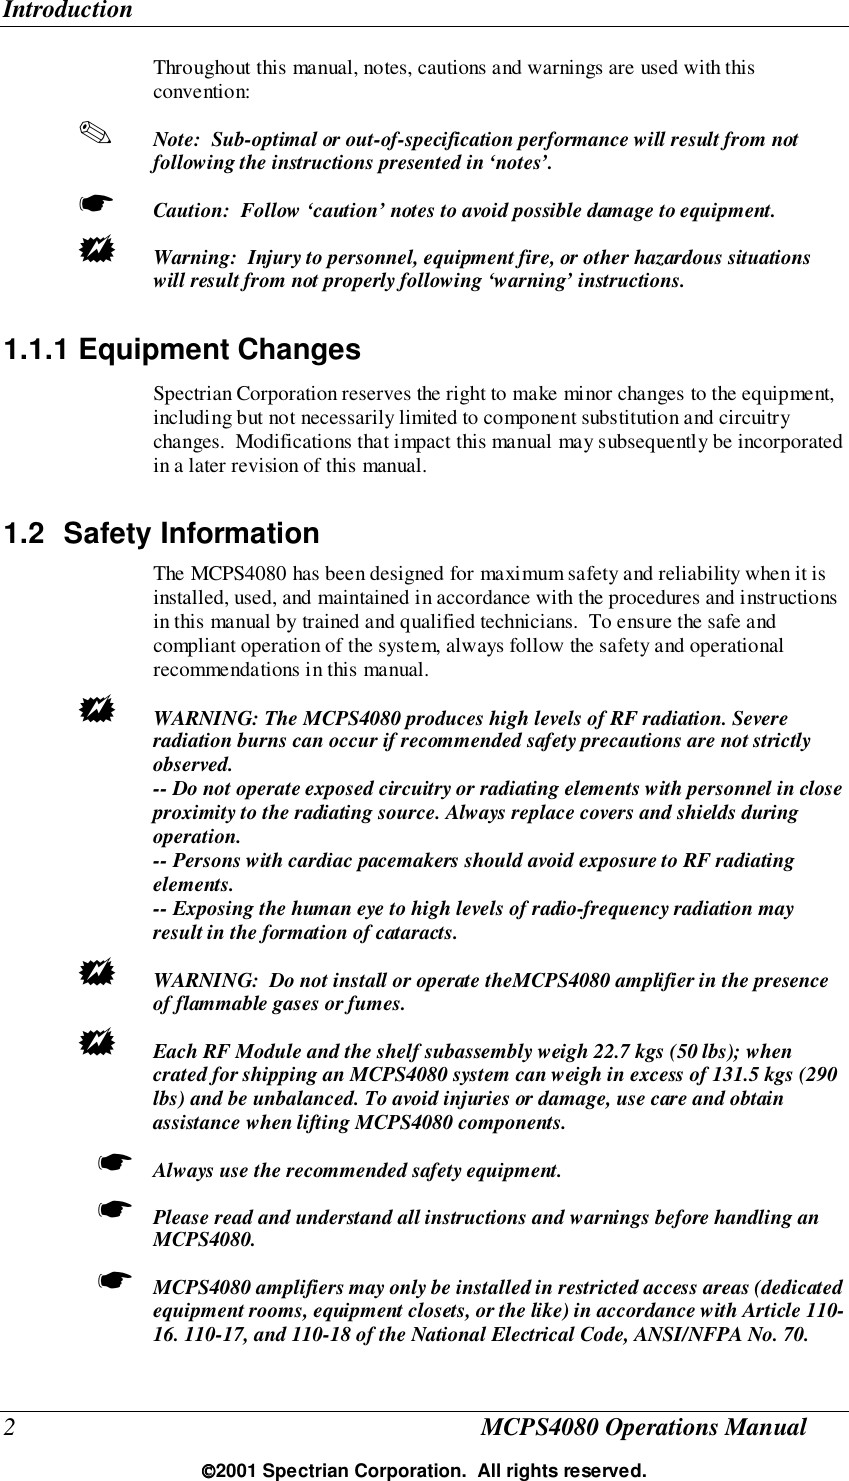 Introduction2MCPS4080 Operations Manual2001 Spectrian Corporation.  All rights reserved.Throughout this manual, notes, cautions and warnings are used with thisconvention:✎ Note:  Sub-optimal or out-of-specification performance will result from notfollowing the instructions presented in ‘notes’.☛ Caution:  Follow ‘caution’ notes to avoid possible damage to equipment.! Warning:  Injury to personnel, equipment fire, or other hazardous situationswill result from not properly following ‘warning’ instructions.1.1.1 Equipment ChangesSpectrian Corporation reserves the right to make minor changes to the equipment,including but not necessarily limited to component substitution and circuitrychanges.  Modifications that impact this manual may subsequently be incorporatedin a later revision of this manual.1.2 Safety InformationThe MCPS4080 has been designed for maximum safety and reliability when it isinstalled, used, and maintained in accordance with the procedures and instructionsin this manual by trained and qualified technicians.  To ensure the safe andcompliant operation of the system, always follow the safety and operationalrecommendations in this manual.! WARNING: The MCPS4080 produces high levels of RF radiation. Severeradiation burns can occur if recommended safety precautions are not strictlyobserved.-- Do not operate exposed circuitry or radiating elements with personnel in closeproximity to the radiating source. Always replace covers and shields duringoperation.-- Persons with cardiac pacemakers should avoid exposure to RF radiatingelements.-- Exposing the human eye to high levels of radio-frequency radiation mayresult in the formation of cataracts.! WARNING:  Do not install or operate theMCPS4080 amplifier in the presenceof flammable gases or fumes.! Each RF Module and the shelf subassembly weigh 22.7 kgs (50 lbs); whencrated for shipping an MCPS4080 system can weigh in excess of 131.5 kgs (290lbs) and be unbalanced. To avoid injuries or damage, use care and obtainassistance when lifting MCPS4080 components.☛ Always use the recommended safety equipment.☛ Please read and understand all instructions and warnings before handling anMCPS4080.☛ MCPS4080 amplifiers may only be installed in restricted access areas (dedicatedequipment rooms, equipment closets, or the like) in accordance with Article 110-16. 110-17, and 110-18 of the National Electrical Code, ANSI/NFPA No. 70.